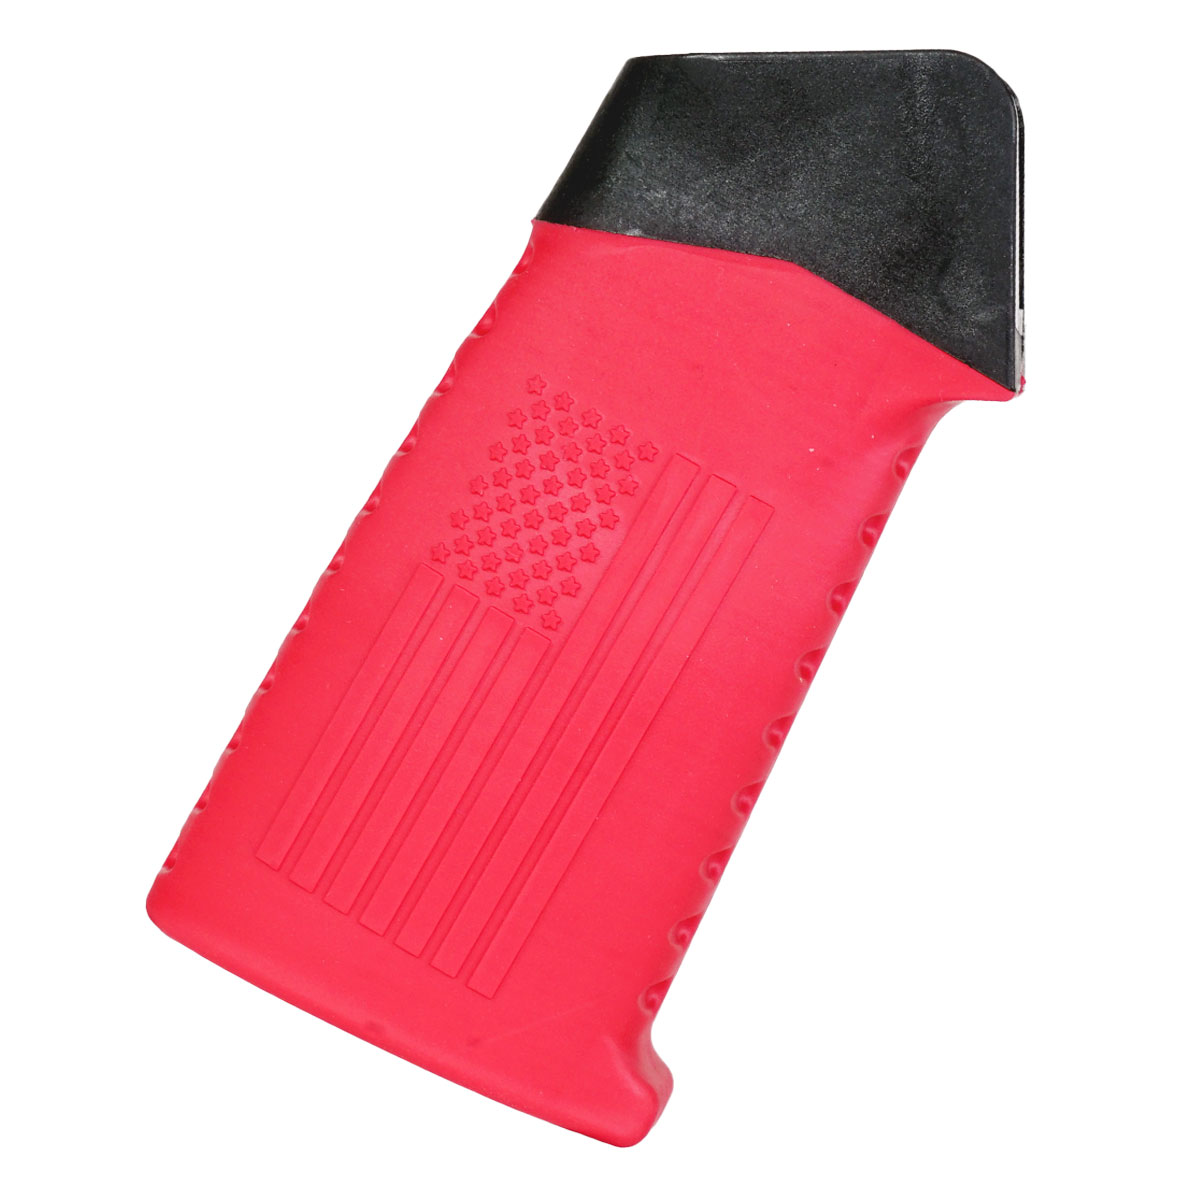 Team Accessories Corp AR15 Grip Window Grip Straight Top Flag/Ribbed Red